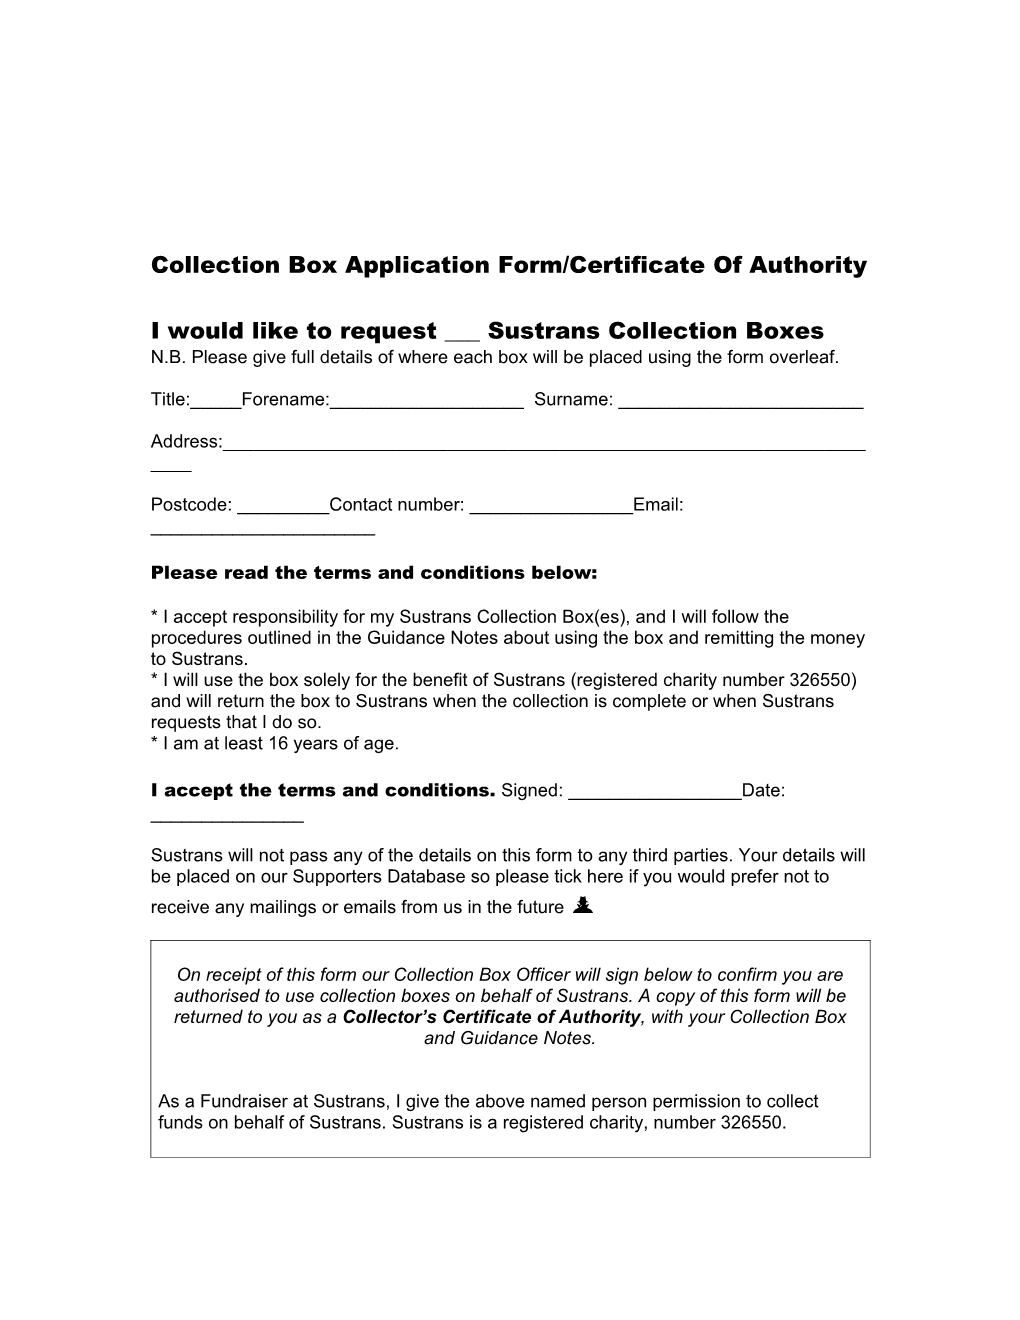 Static Collection Box Application Form/Certificate of Authority